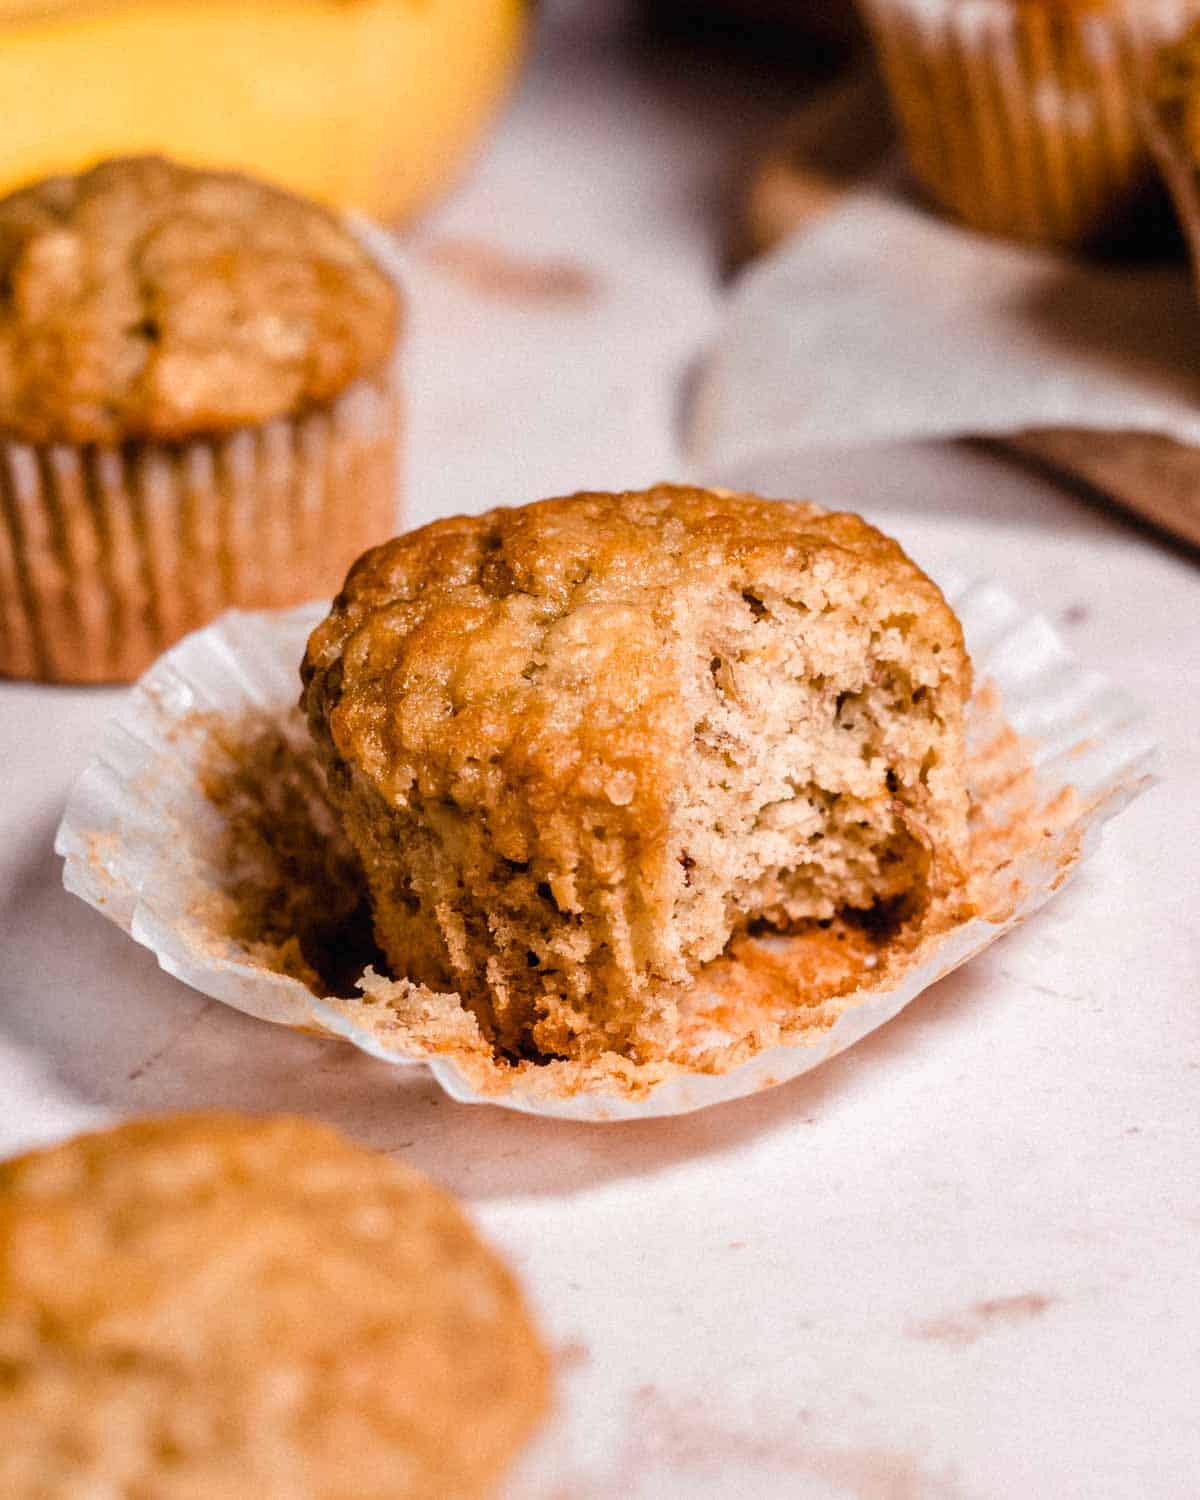 unwrapped banana muffin with one bite bitten off.